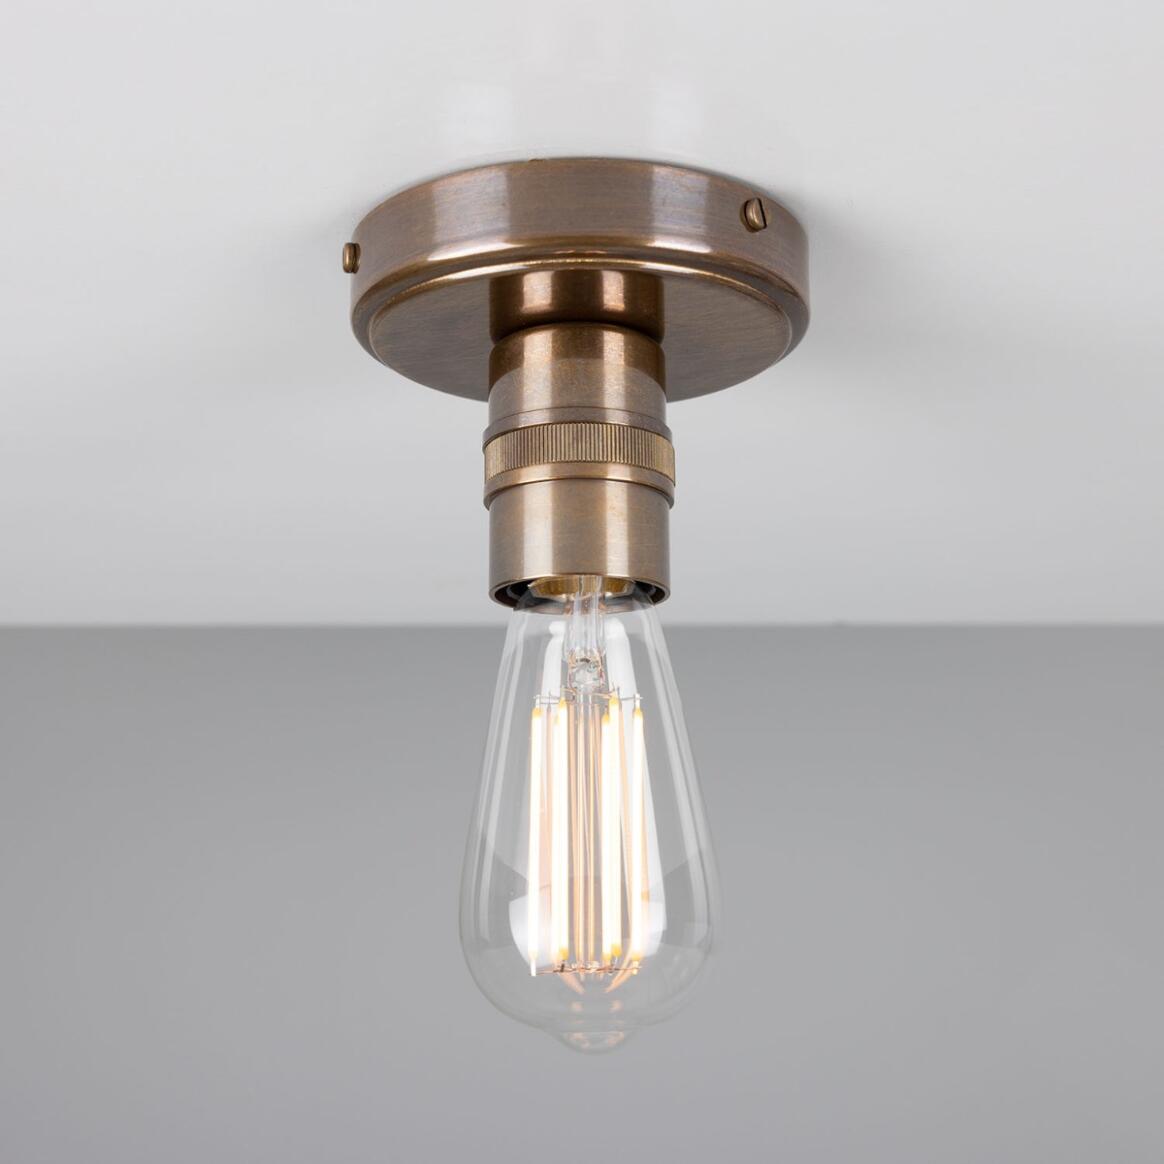 Bexter Vintage Exposed Bulb Flush Ceiling Light main product image